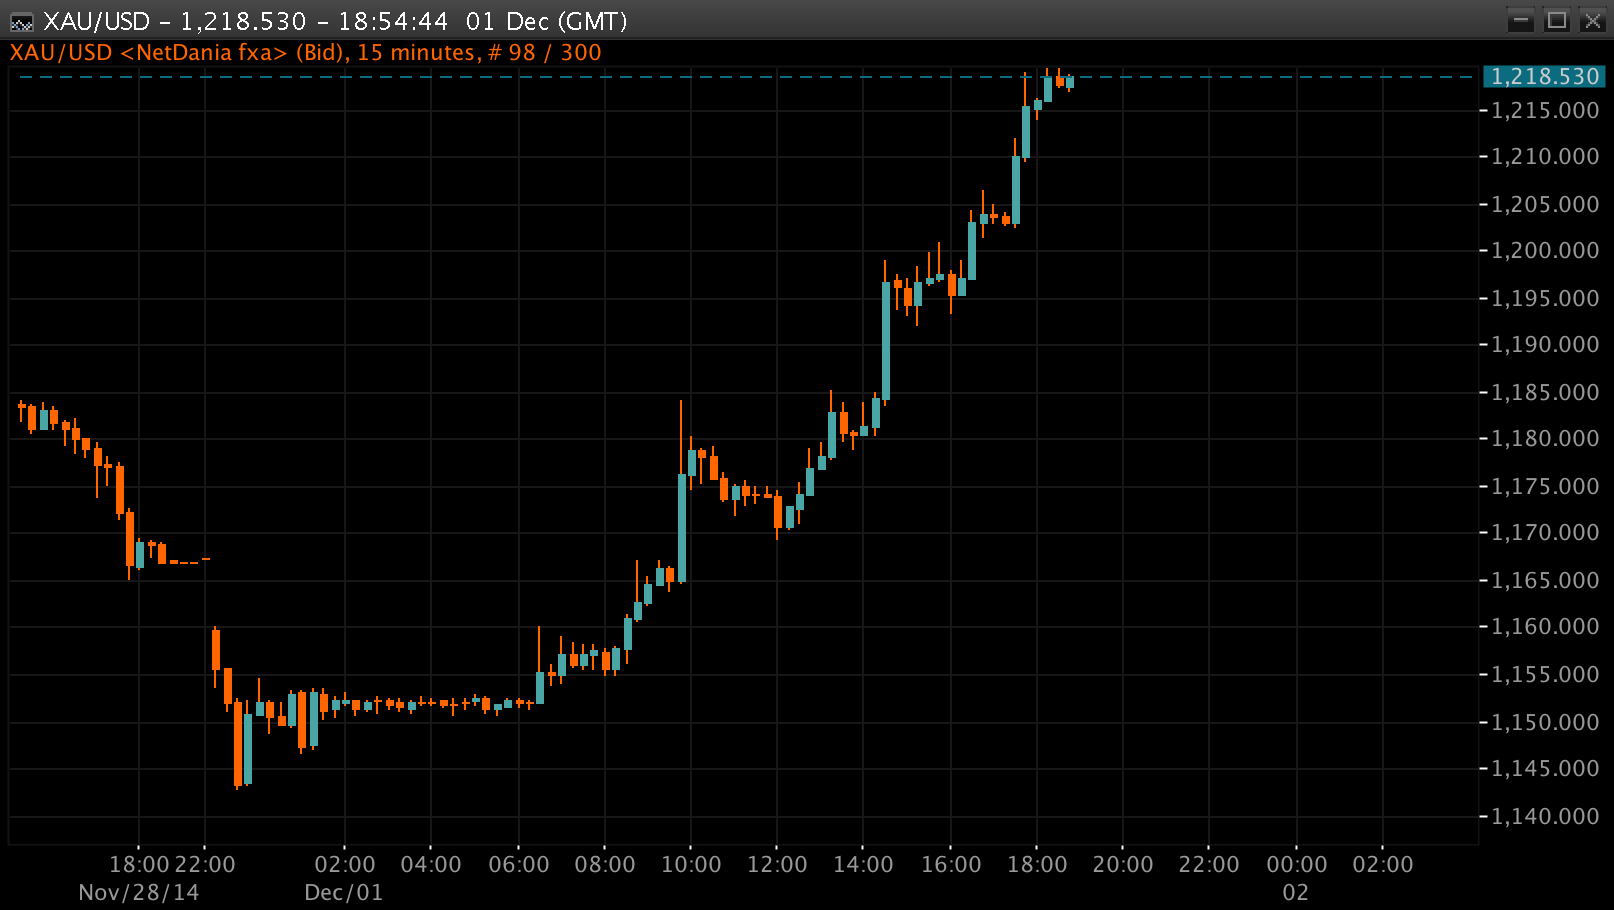 Gold Chart This Monday, 15 min intervals, Source: NetDania 